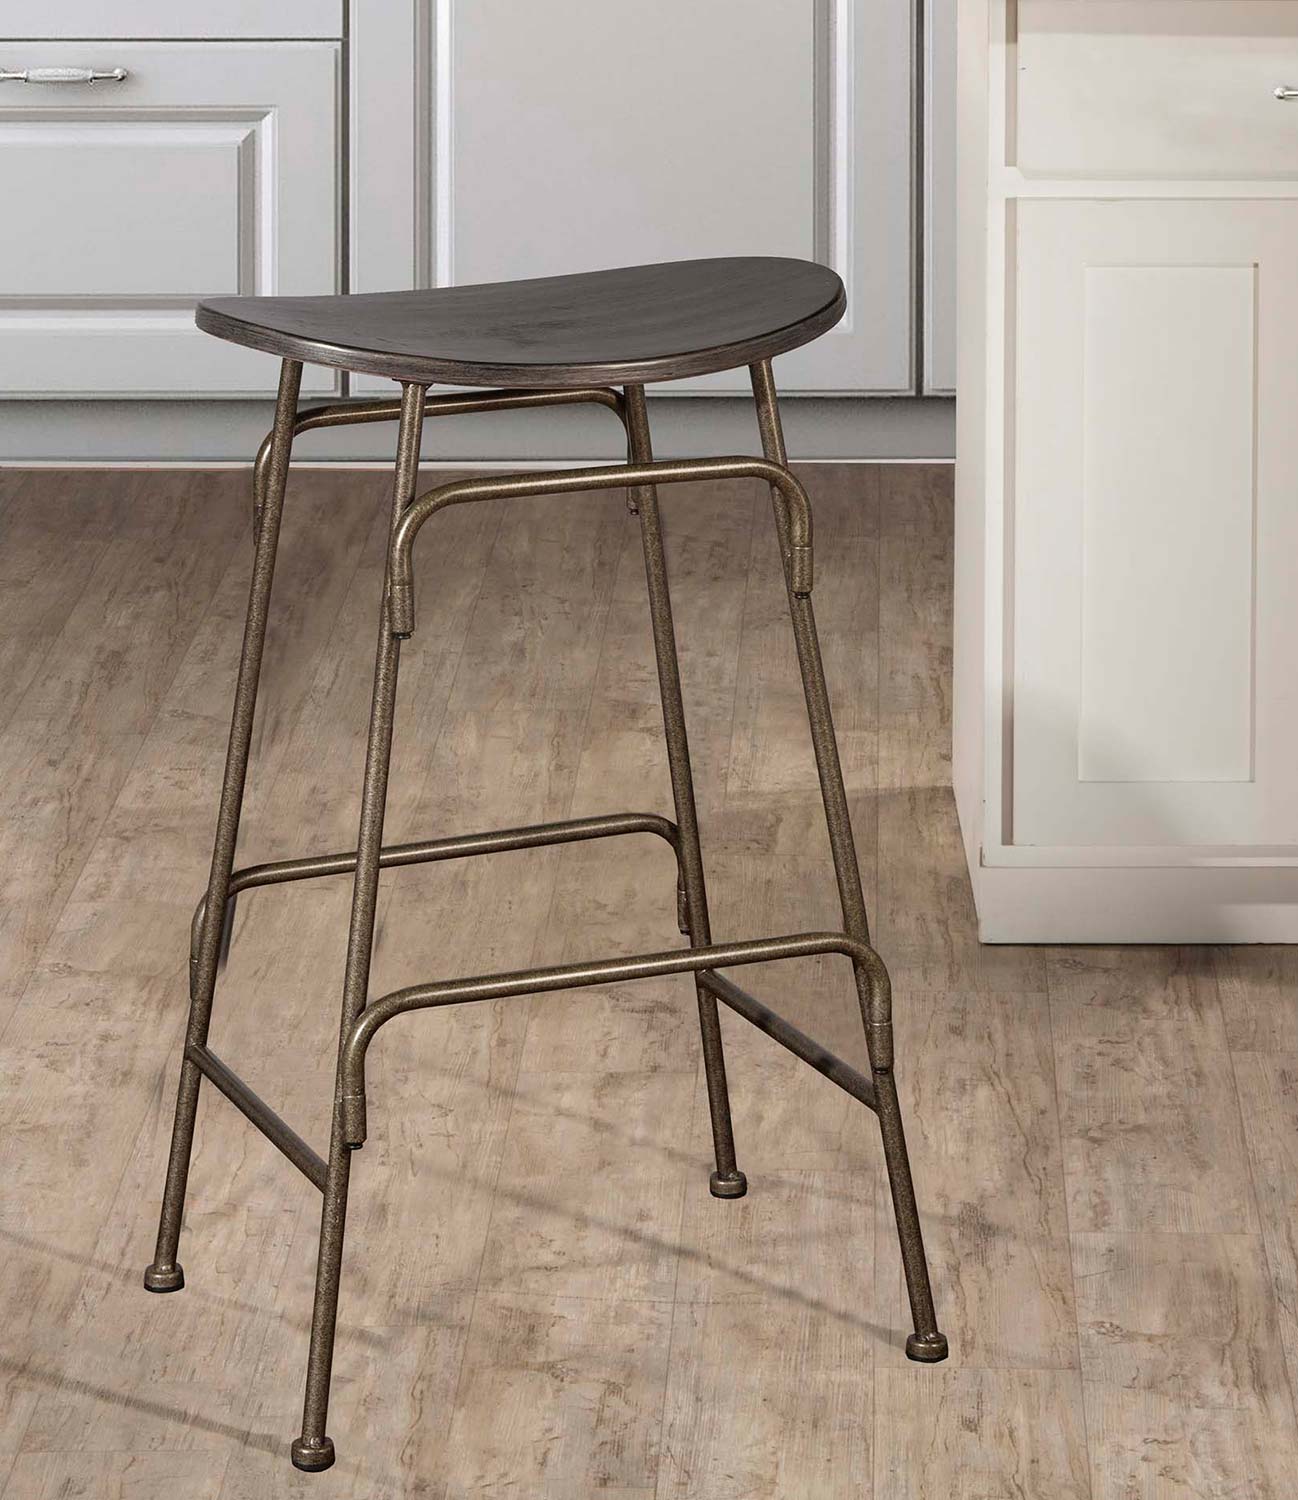 Hillsdale Mitchell Non-Swivel Backless Bar Stool - Black Wood/Old Bronze Metal